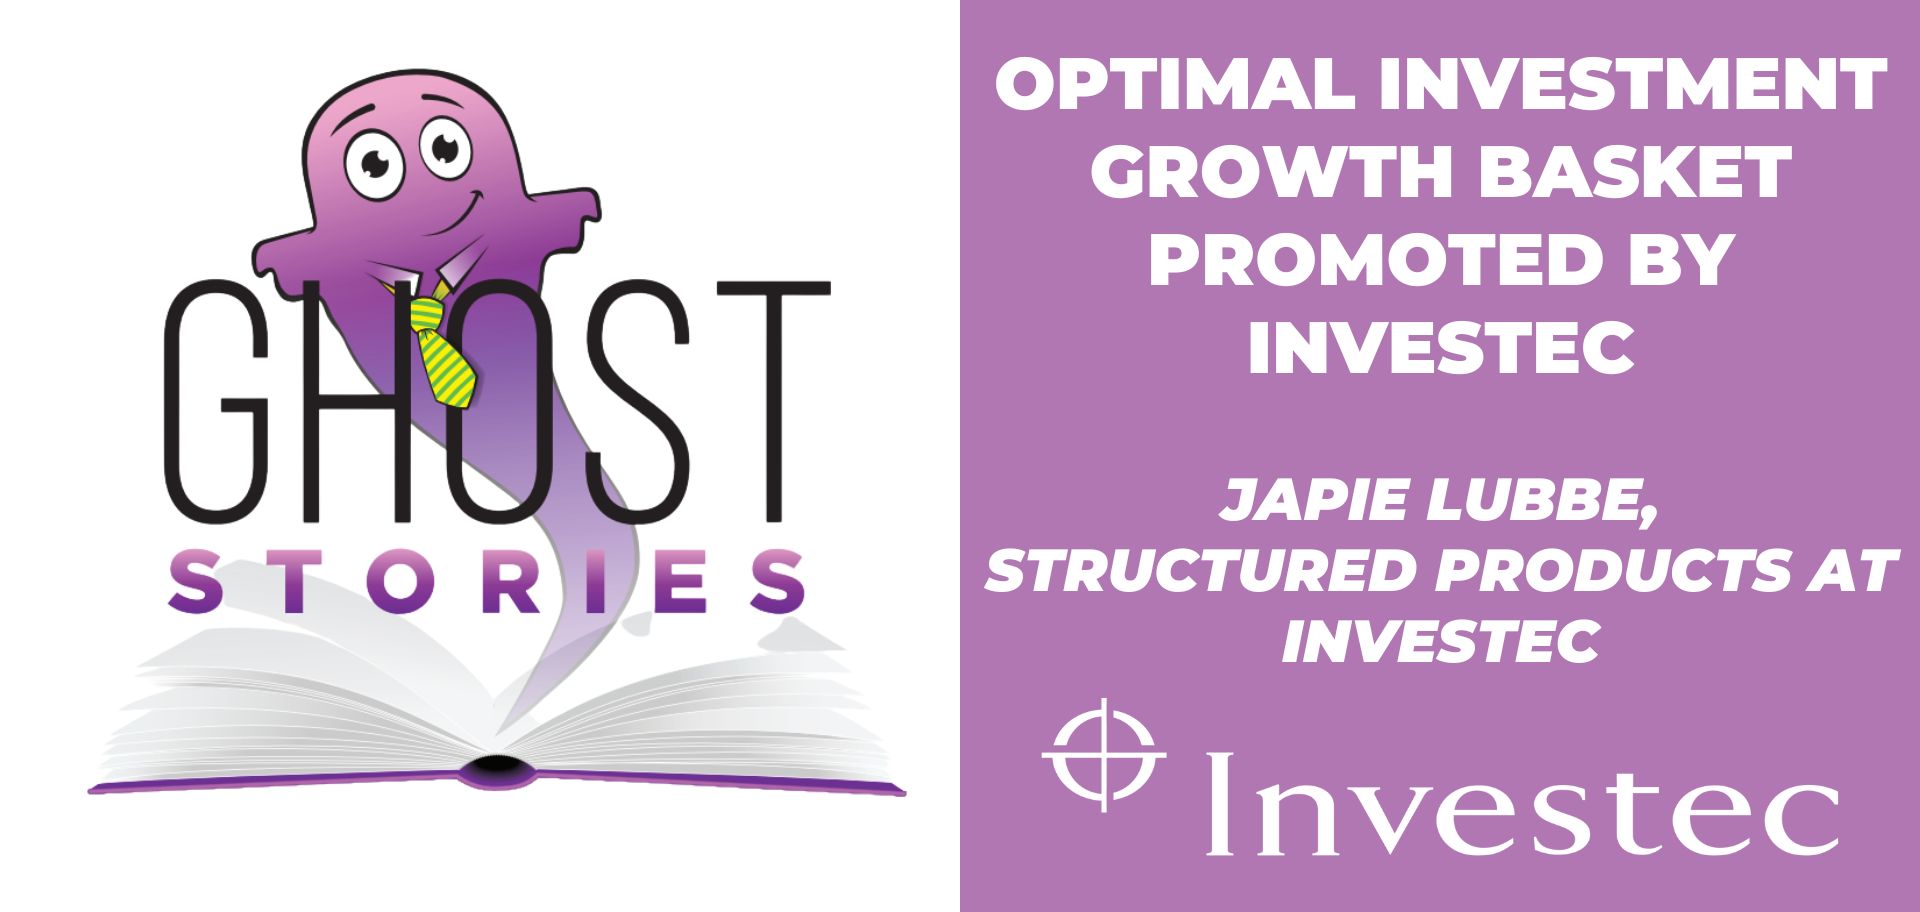 Ghost Stories #22: Optimal Investment Growth Basket promoted by Investec